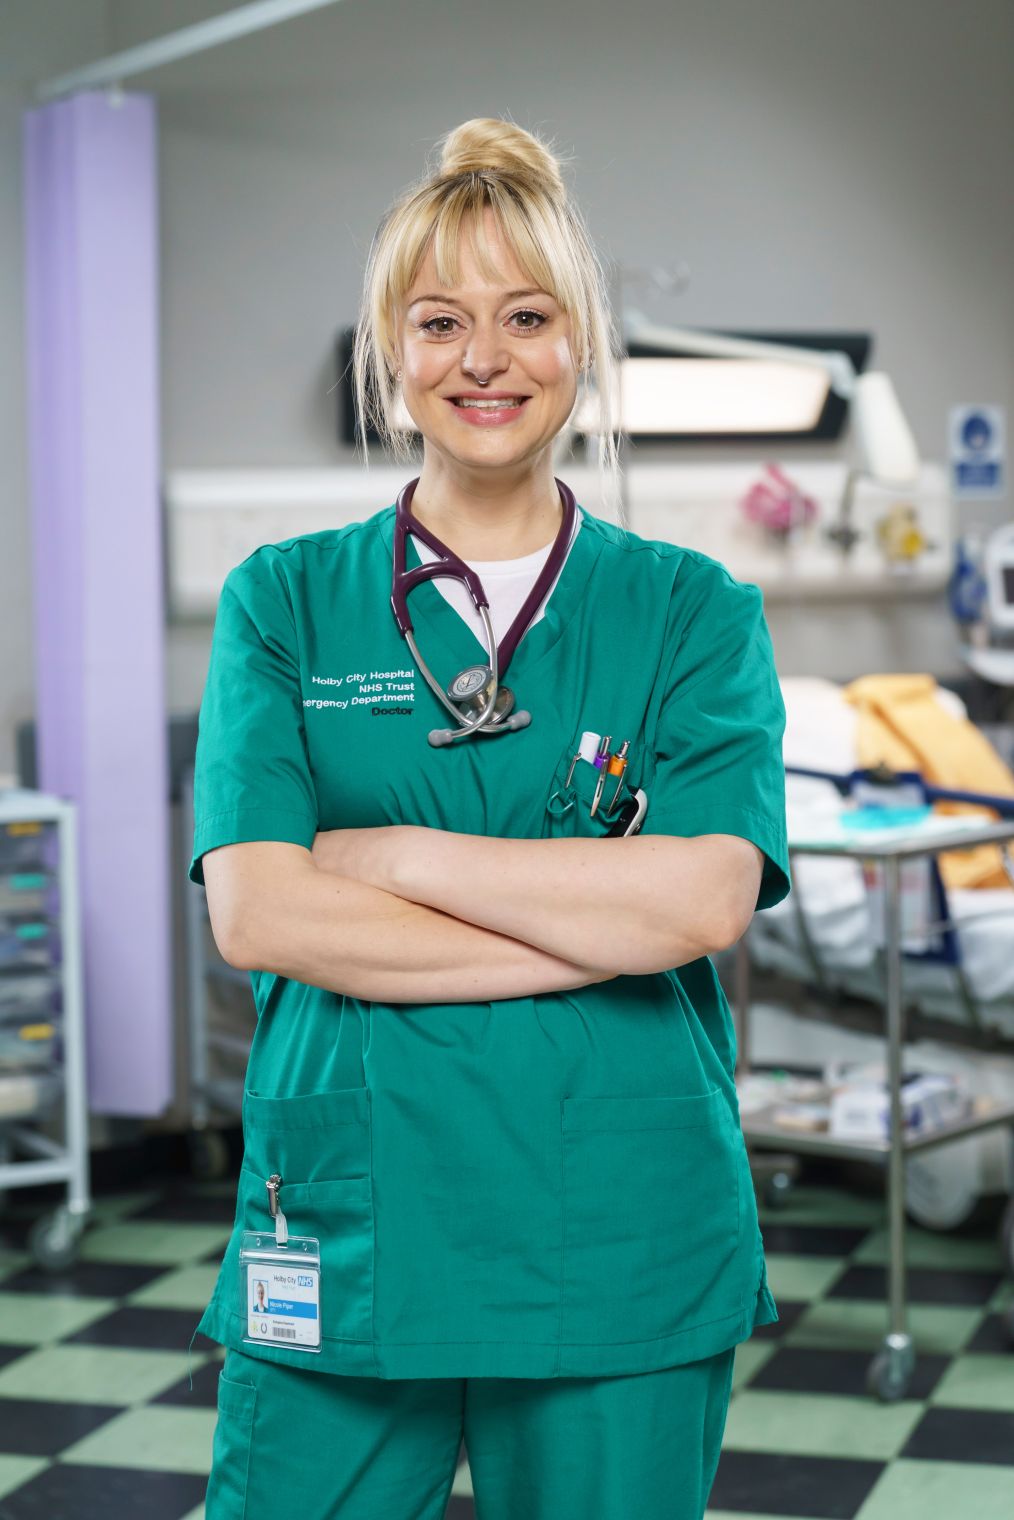 Sammy Dobson makes her debut in this weekend’s Casualty as new junior doctor Nicole Piper